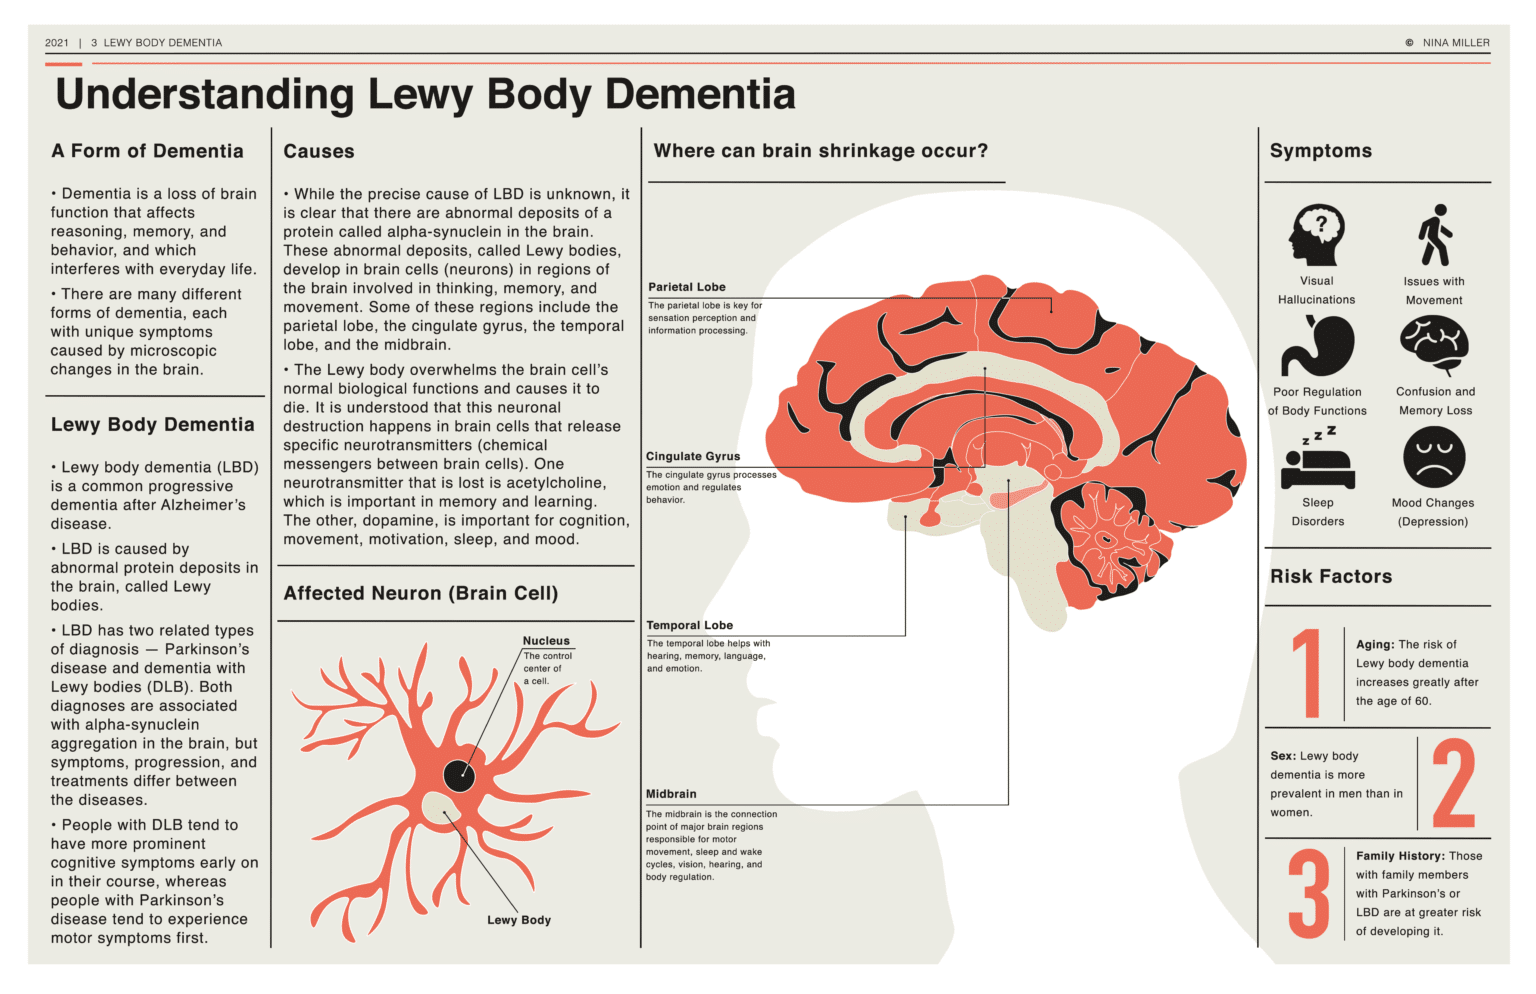 current research on lewy body dementia